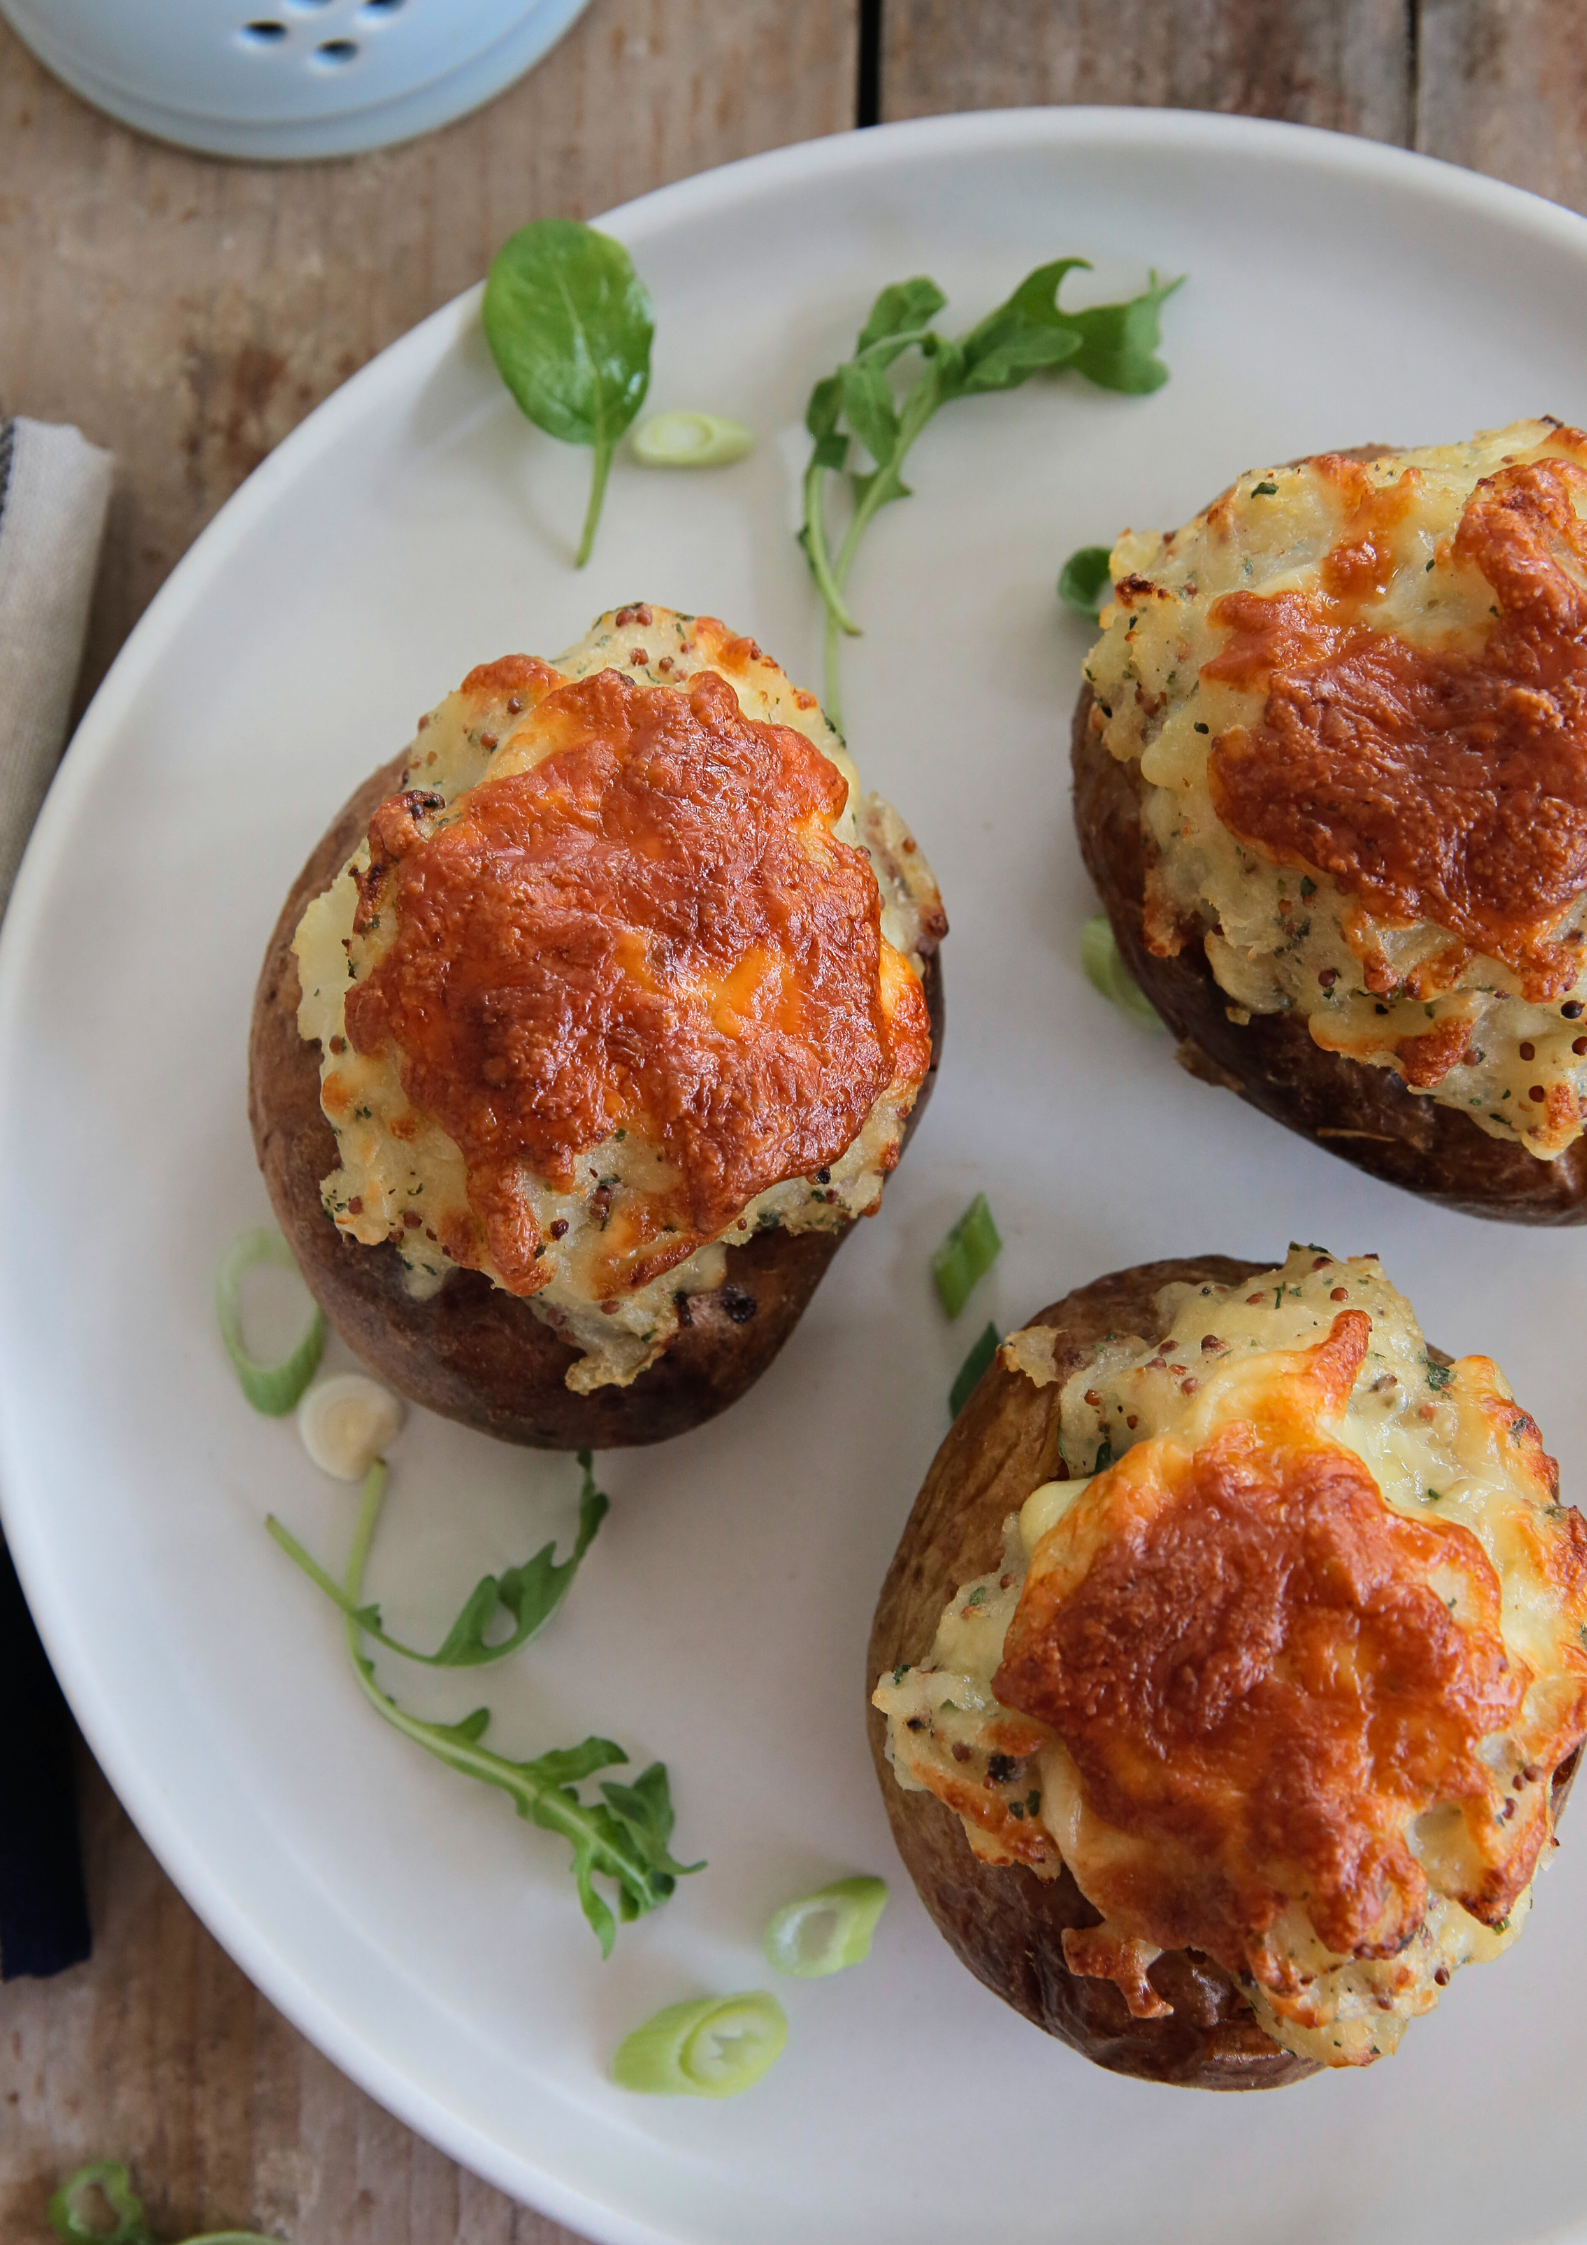 Vegan shepherds pie twice baked potatoes combines two great comfort foods for a make ahead lunch or hearty dinner when paired with extra veggies or crisp salad! #ovenbakedpotatoes #potatorecipes #twicebakedpotatoes #veganshepherdspie